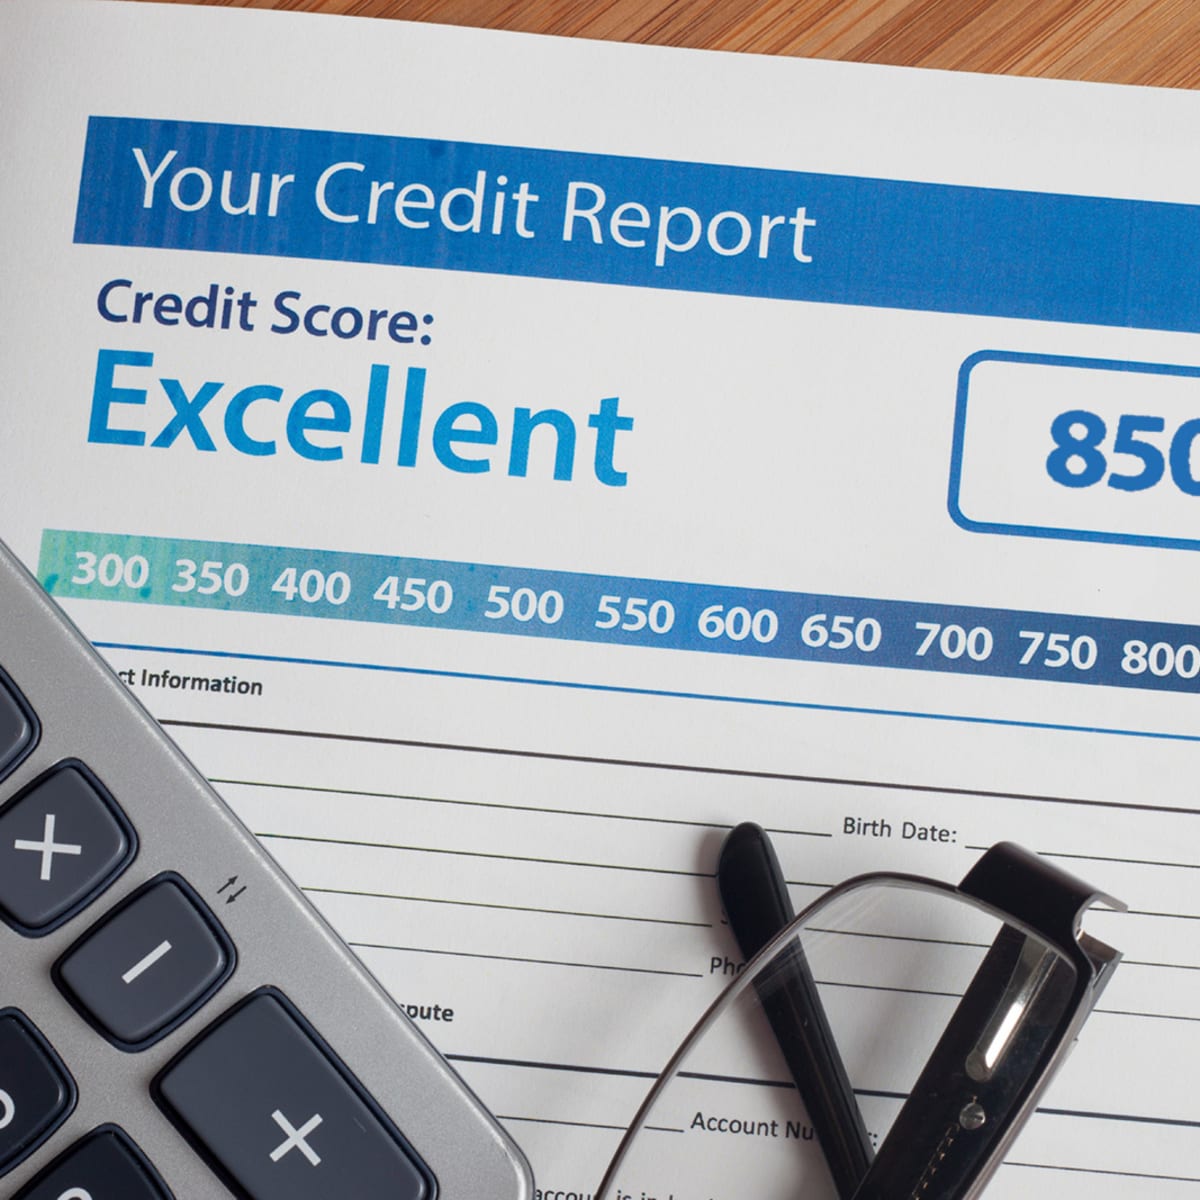 achieve-the-highest-possible-credit-score Here's how to achieve the highest possible credit score?